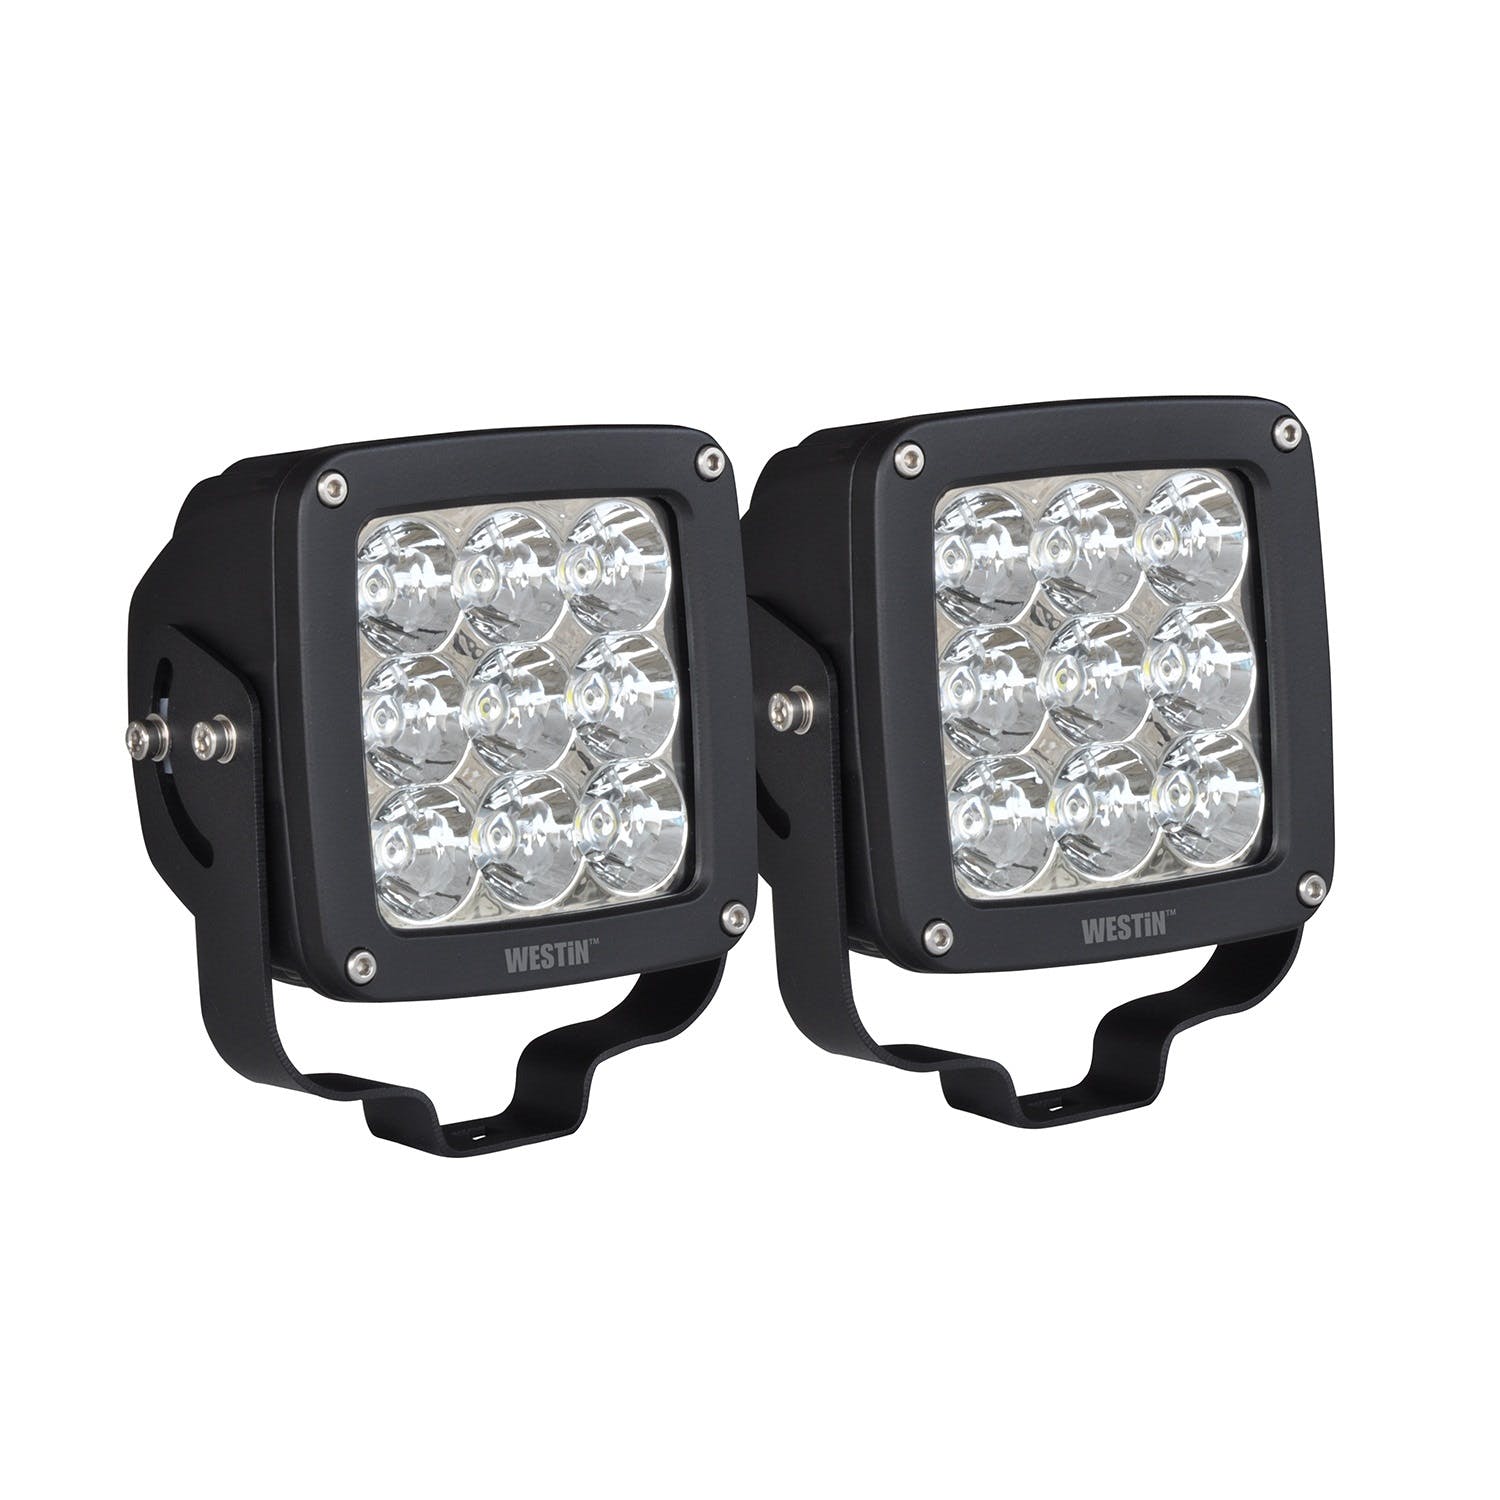 Westin Automotive 09-12219A-PR LED Auxiliary Light 4.5 inch x 4.5 inch Square Spot with 3W Osram (Set of 2)